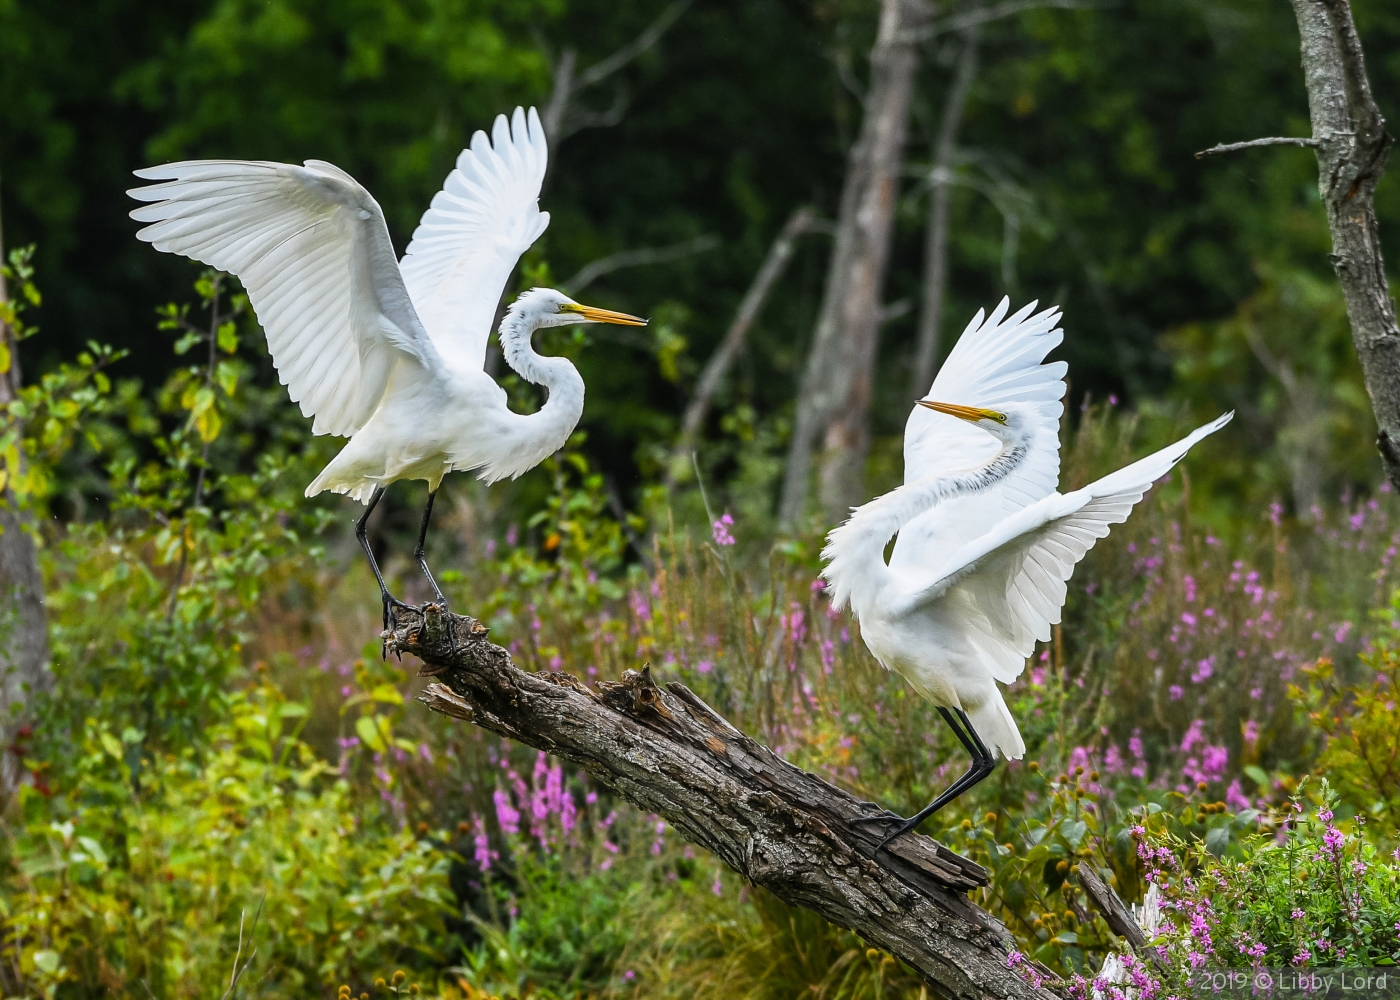 Dueling Egrets by Libby Lord